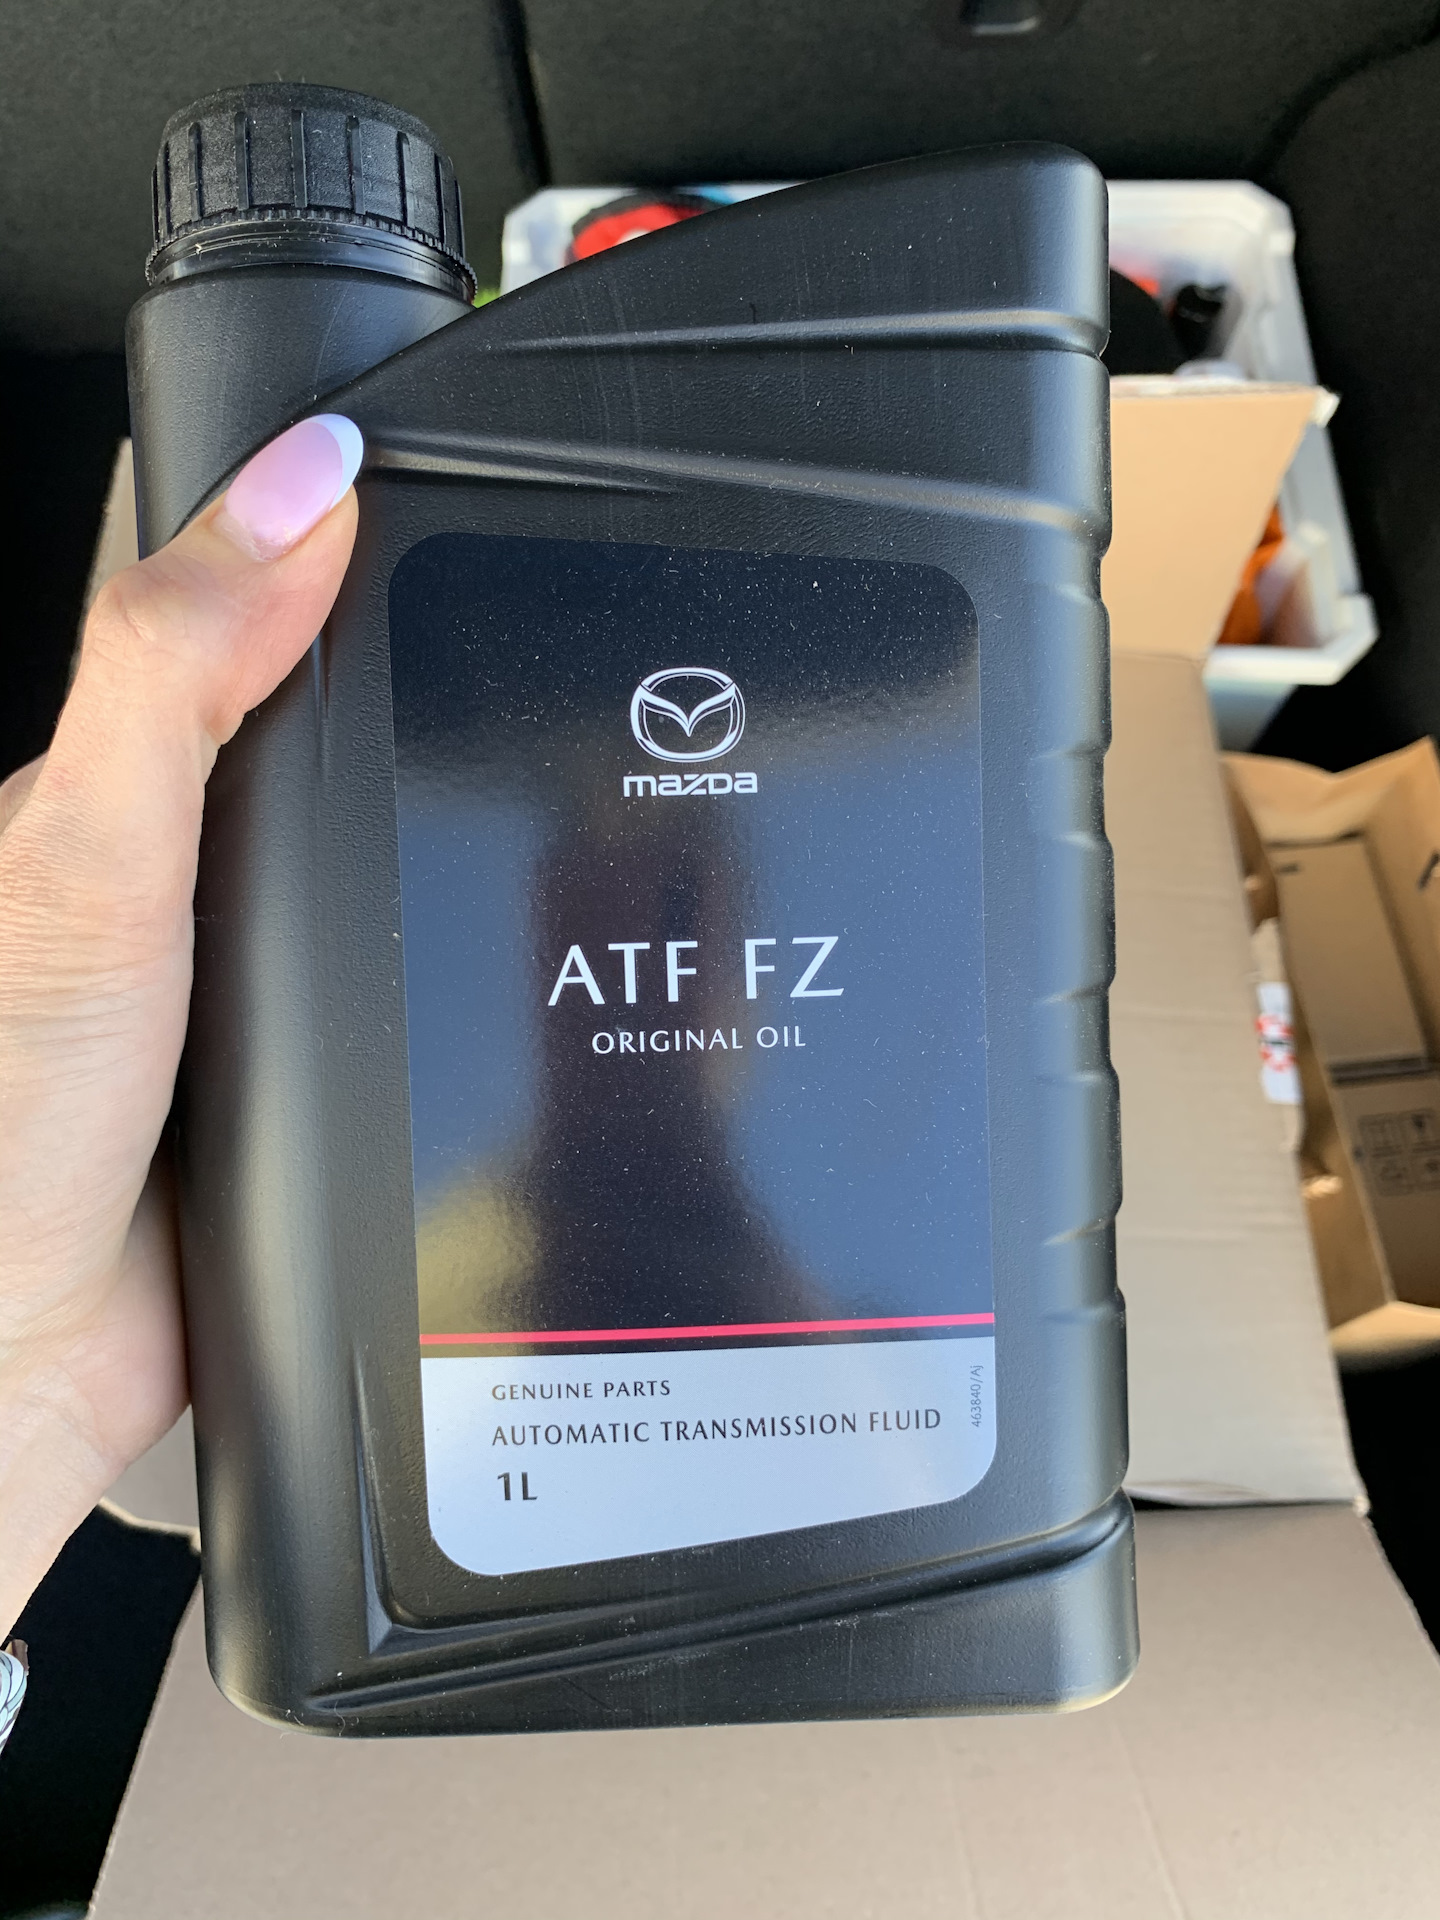 Atf zf. Mazda ATF fz3. Масло АТФ Мазда ATF FZ. ATF FZ Mazda артикул 830077994. ATF FZ Mazda 5л.